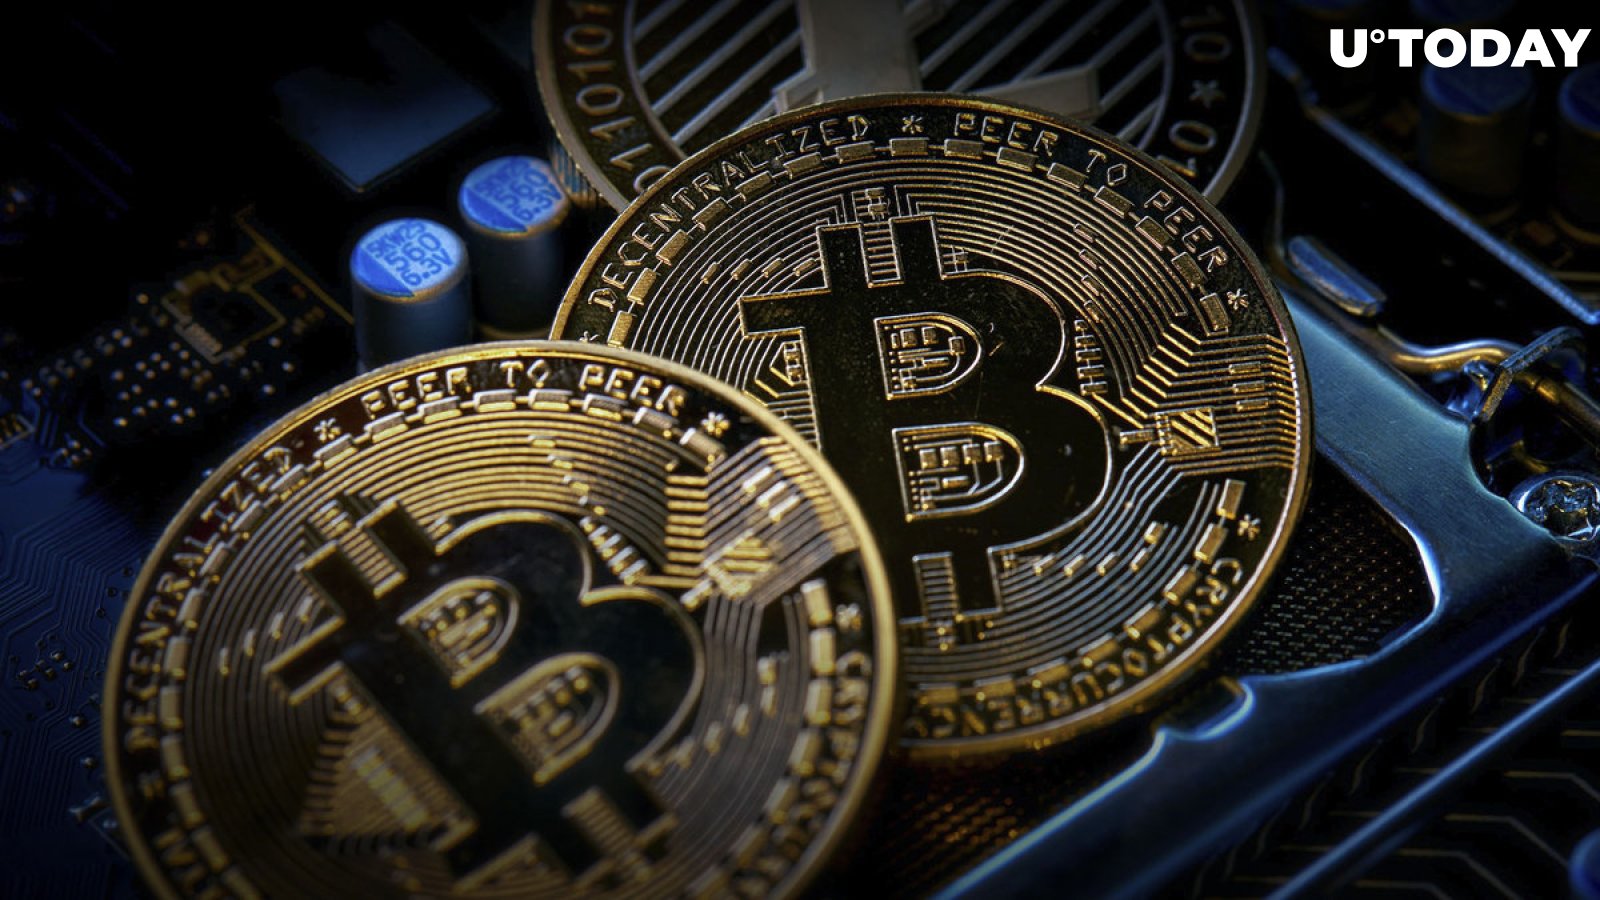 Bitcoin (BTC) Price Over $23,300, but Market Is Not Overheated, Two Indicators Say